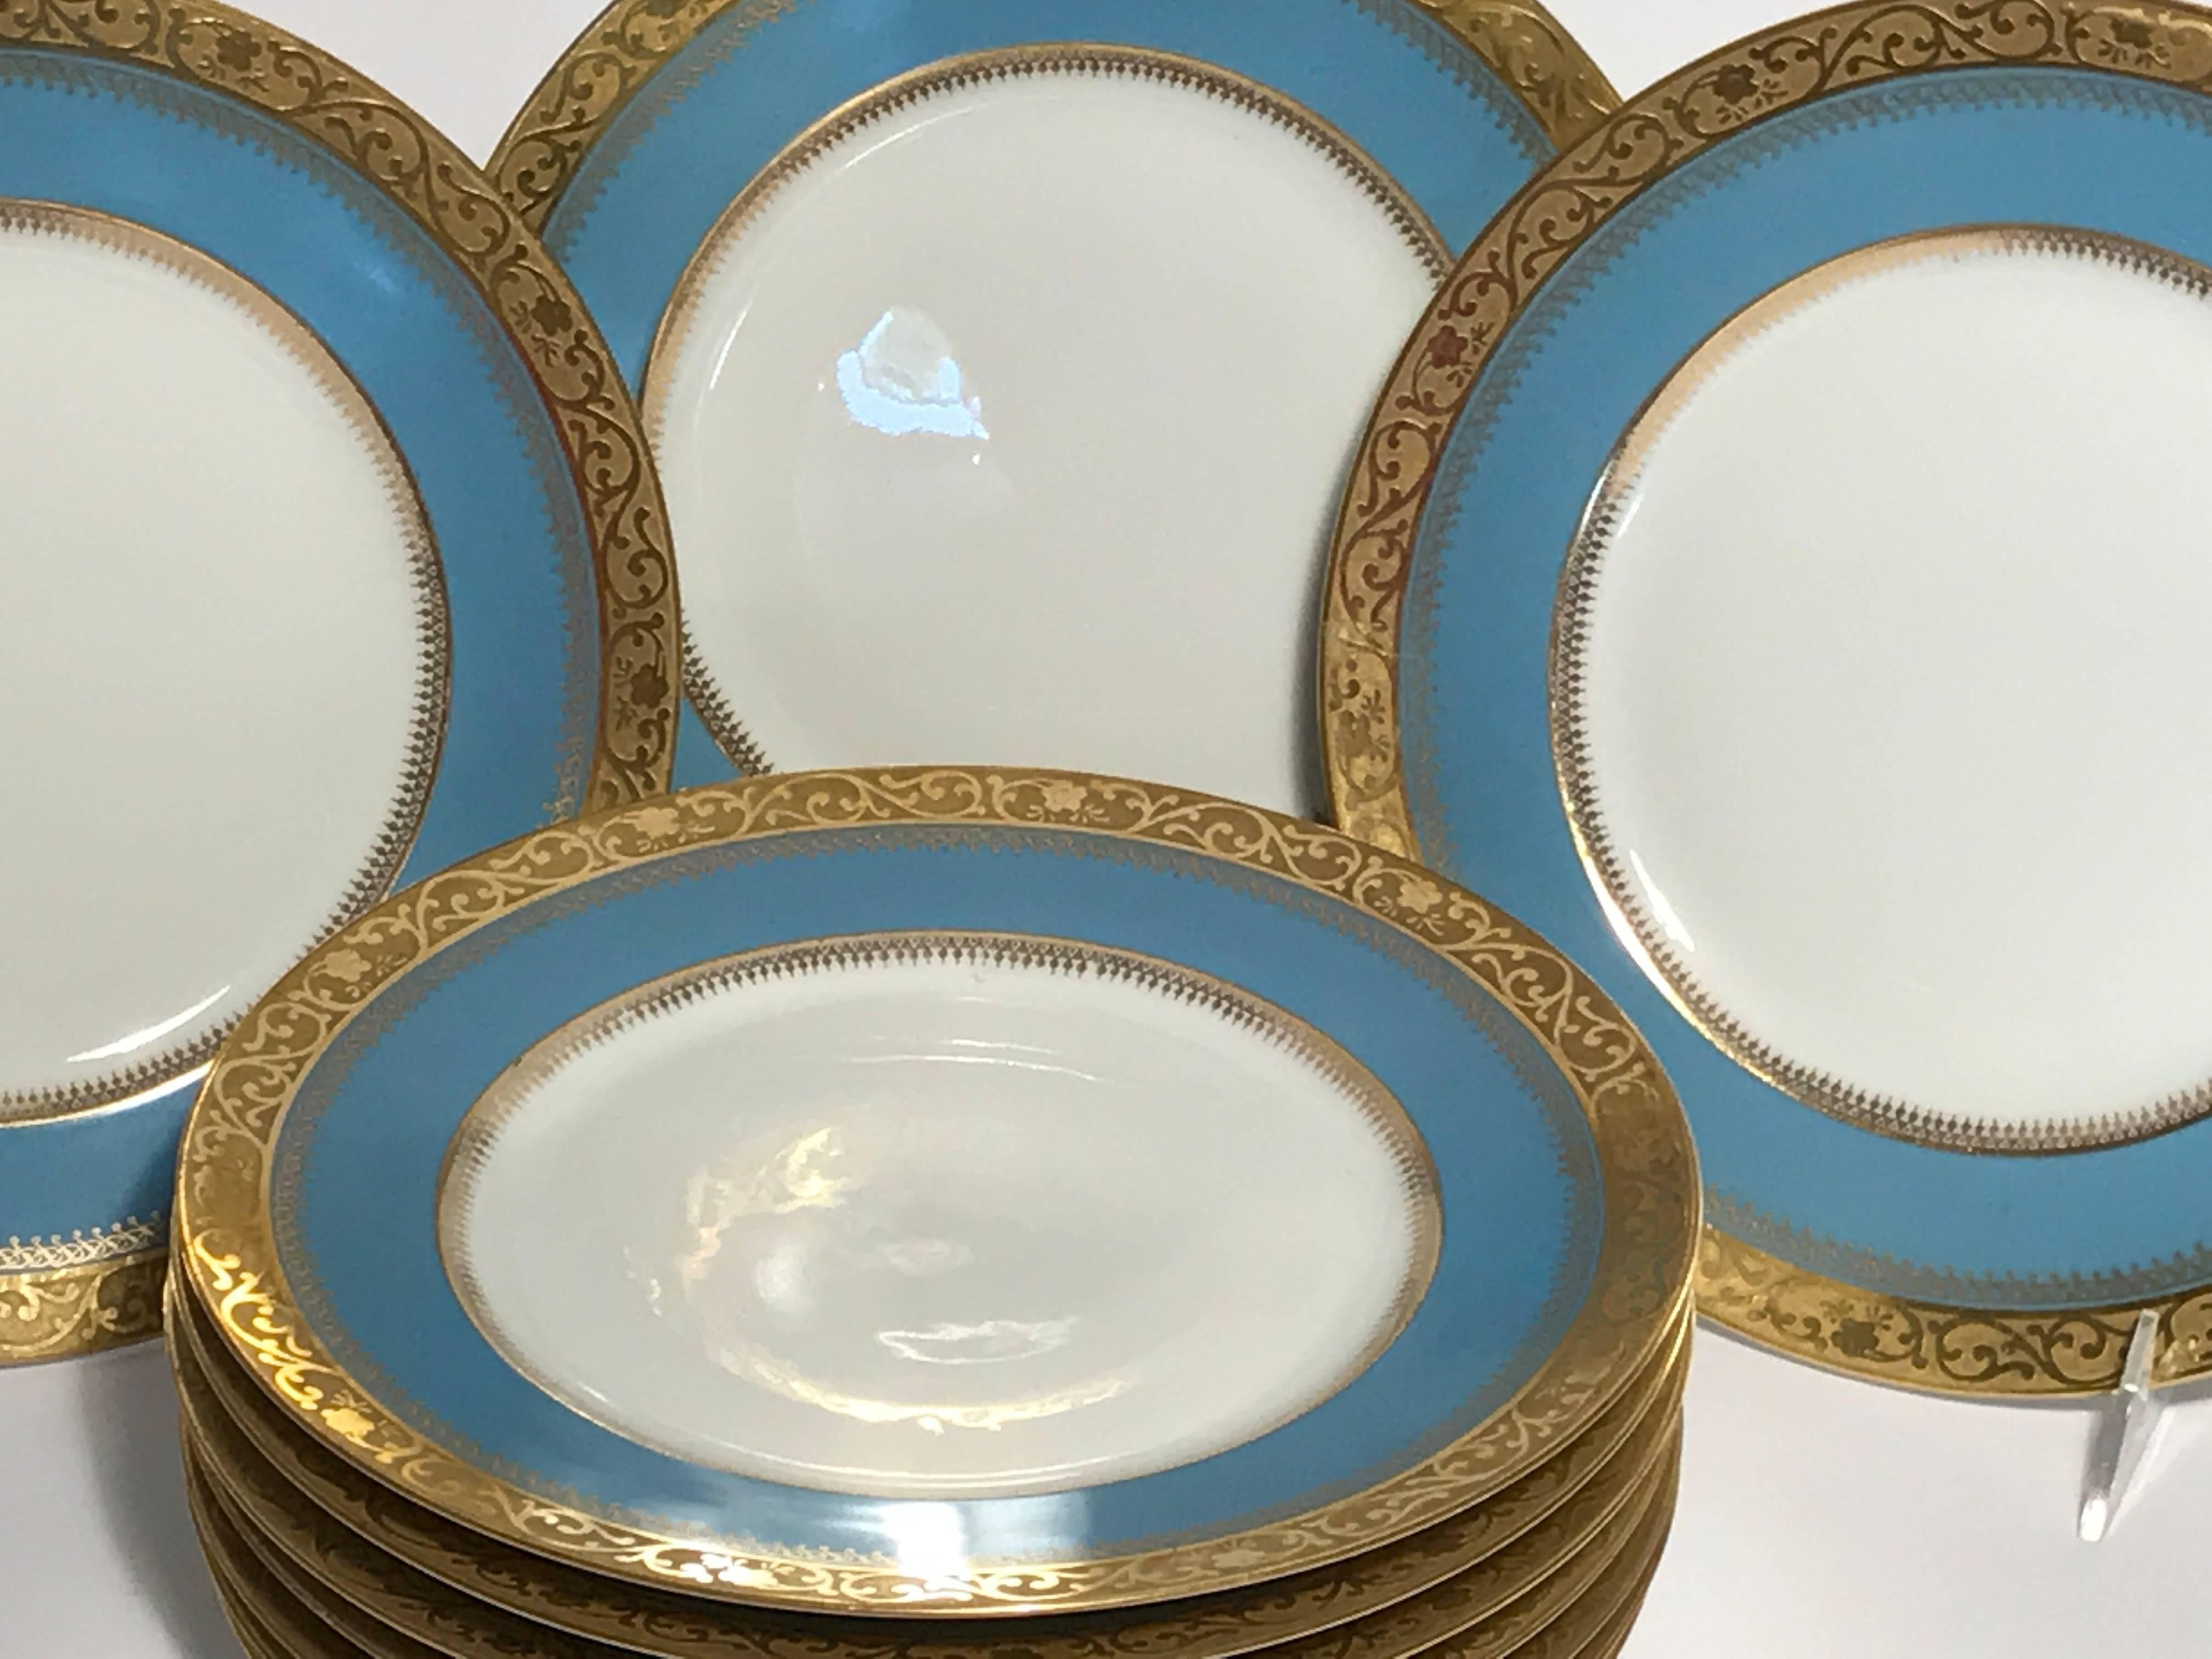 Classic and elegant, these plates feature a nice turquoise shoulder with a textured gold band. Crisp white porcelain. These will mix and match nicely with all your fine china and add a nice burst of color.